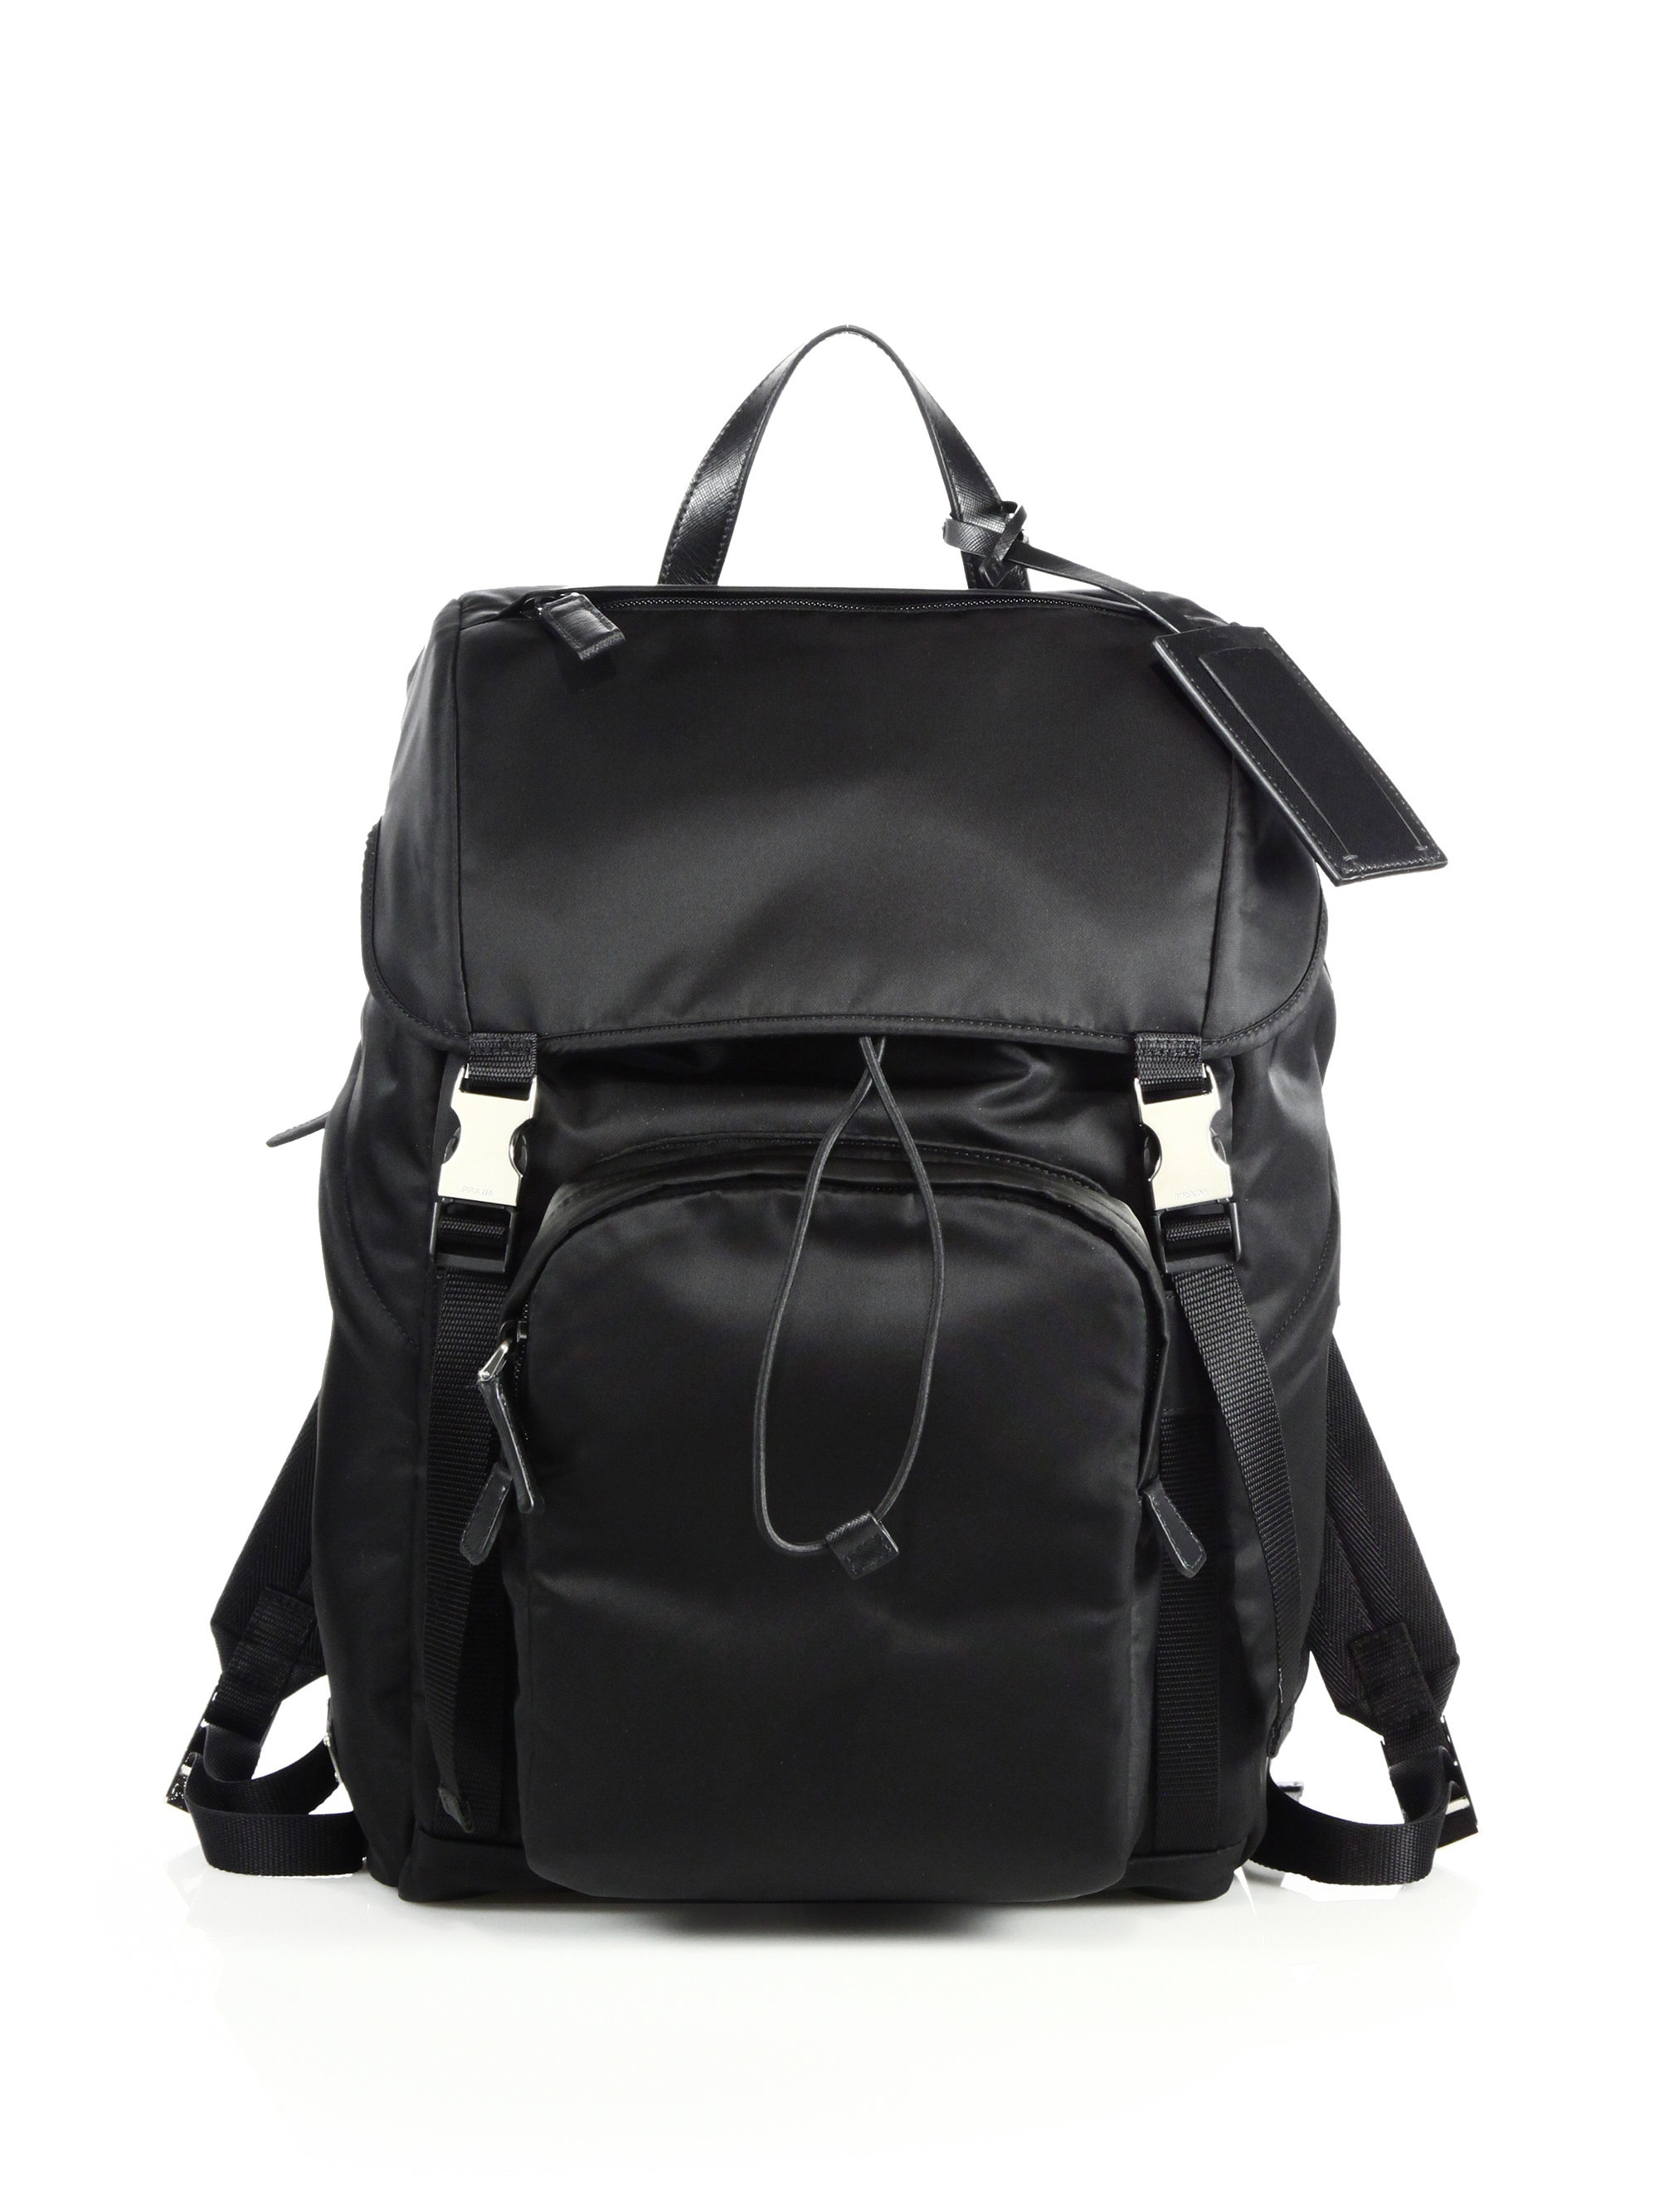 Prada Synthetic Leather Trim Backpack in Black for Men - Lyst